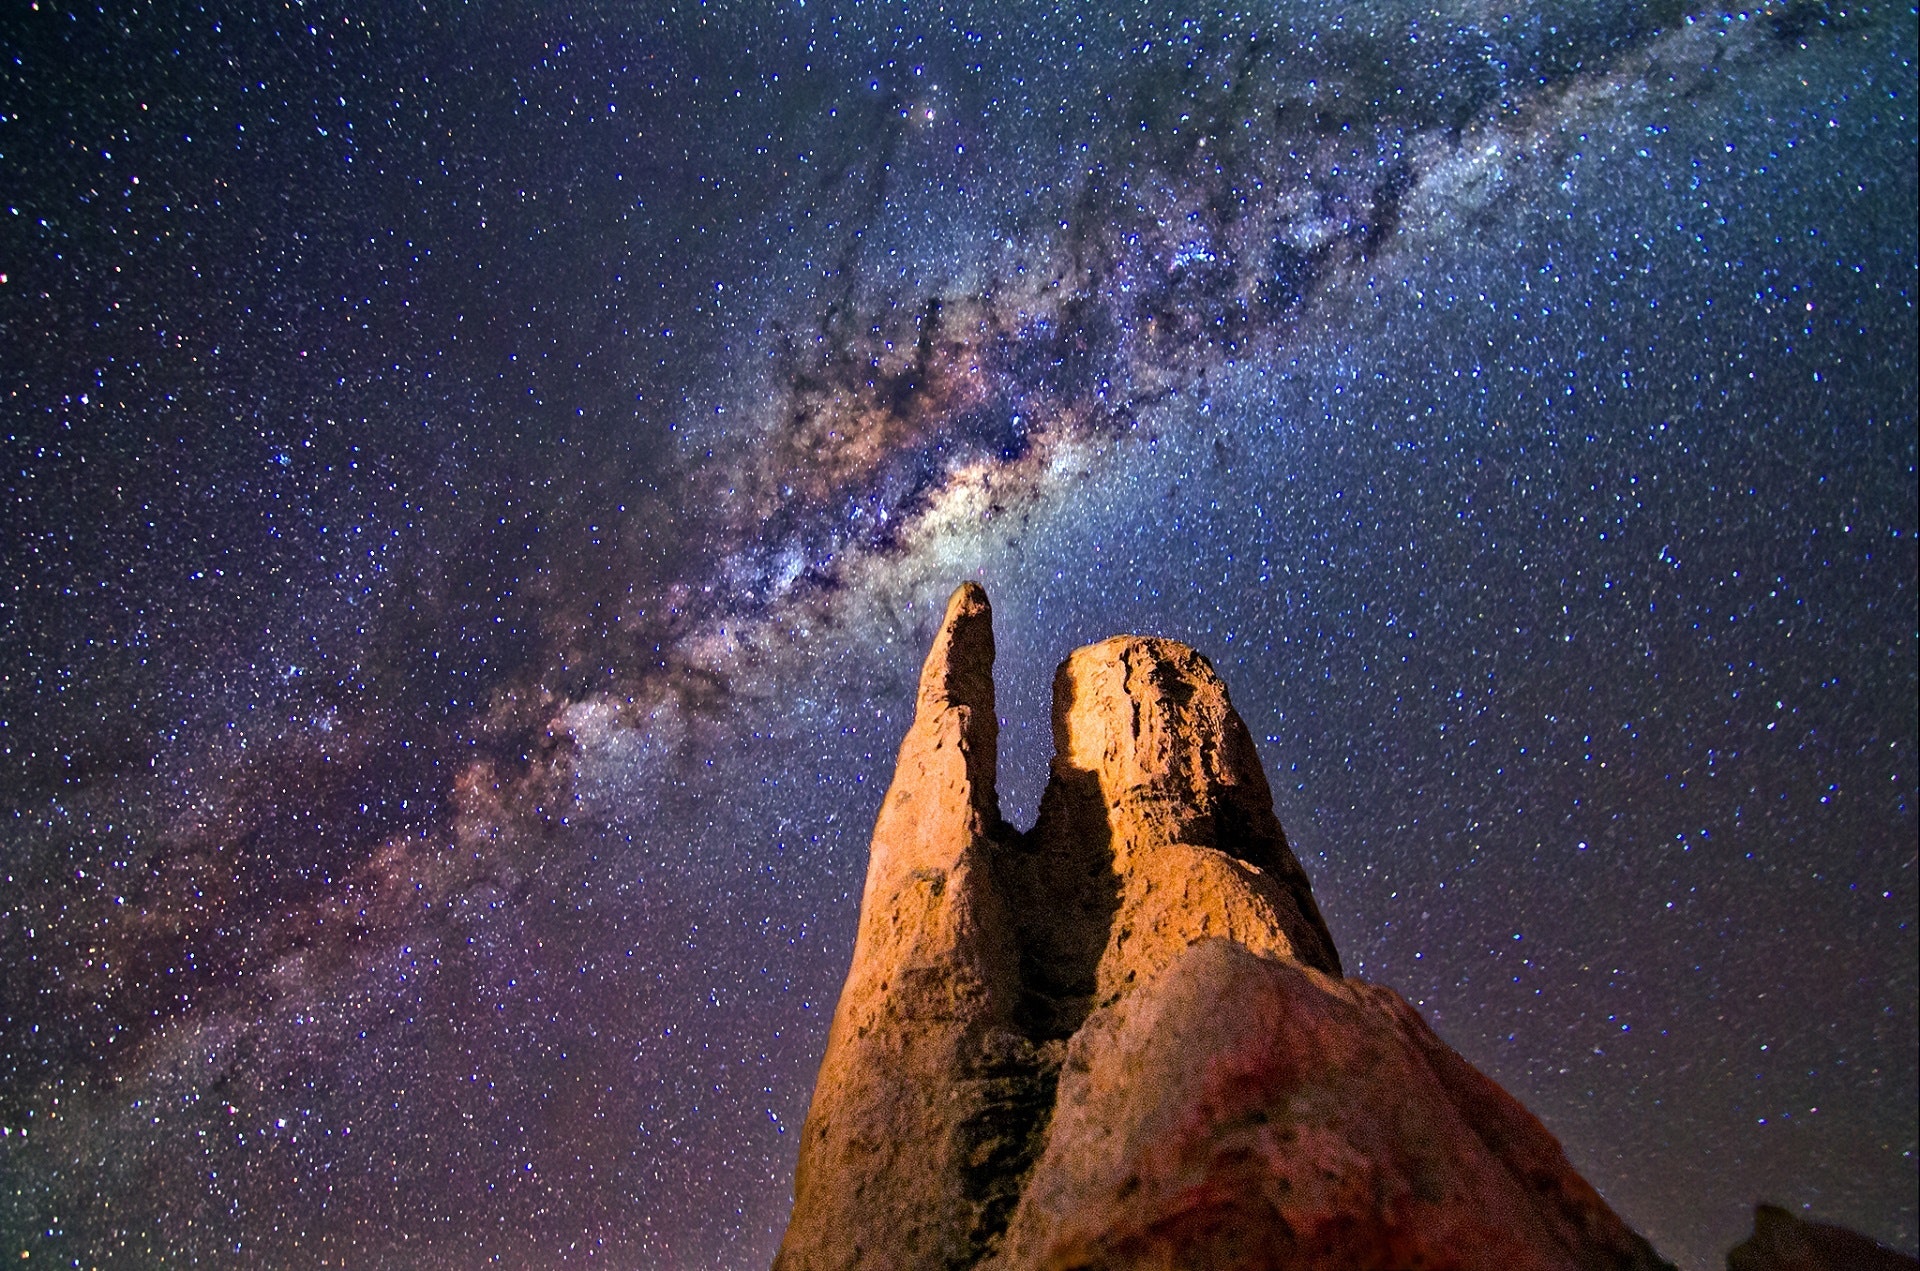 Rock formation during night time photo